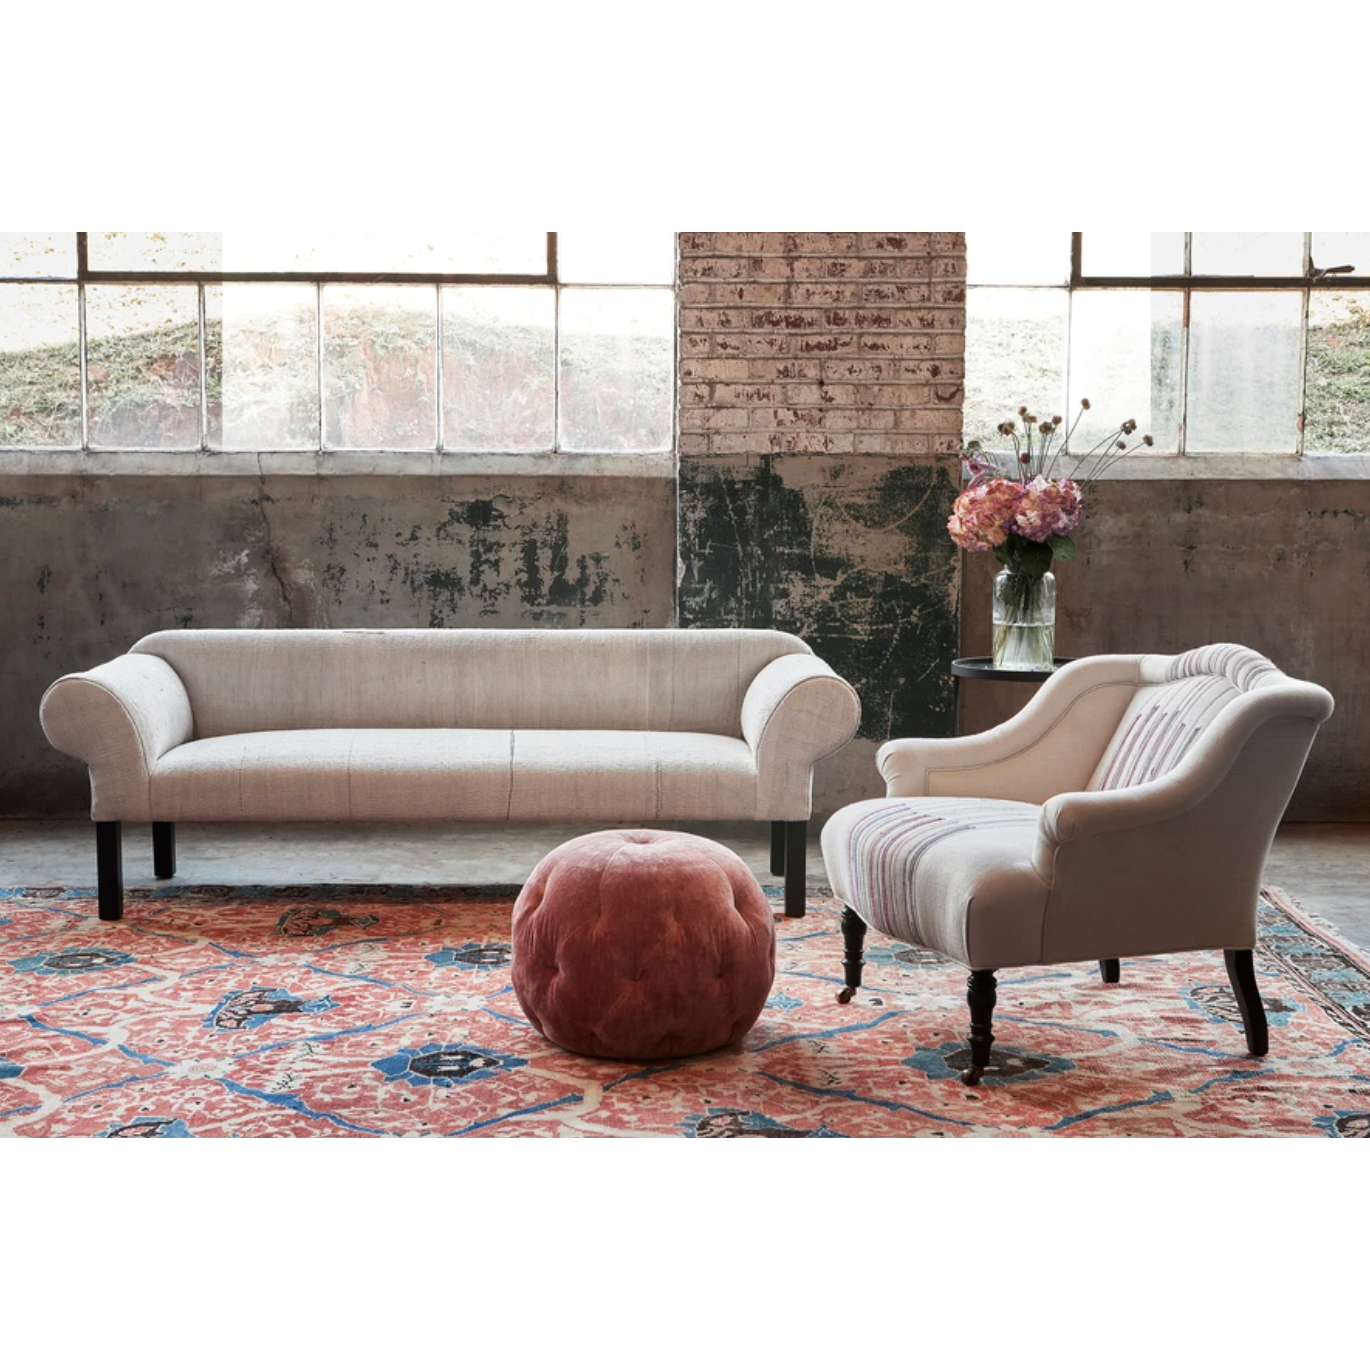 We love the chunky, rolled arms of this Teddy Sofa - John Derian by Cisco Home. With a clean bench seat, this will be a staple furniture piece in your home for years to come!   Overall: 78"W x 27"H x 26"D Sitting Space: 63.5"W x 20"D Seat Height: 19"h Arm Height: 26.5"h Weight: 95lbs Leg: 9.75"h